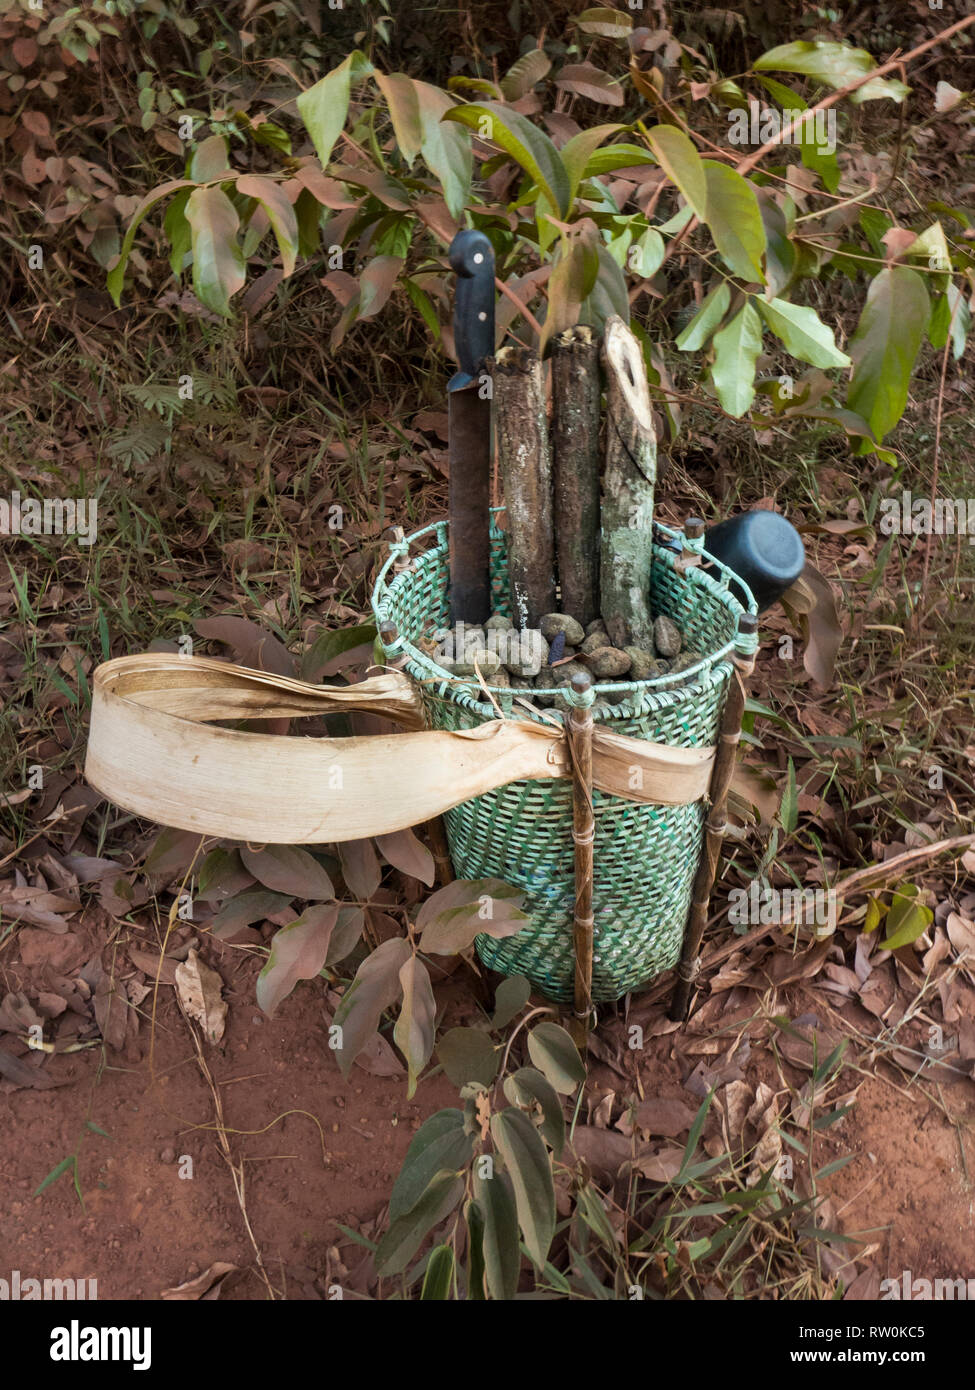 Mato Grosso State, Brazil. A traditional Kayapo design basket, but made of plastic binding tape, stands on the floor of the rainforest with Cumaru (Dipterix odorata, Tonka beans) and cut lengths of medicinal vine from the forest. Stock Photo